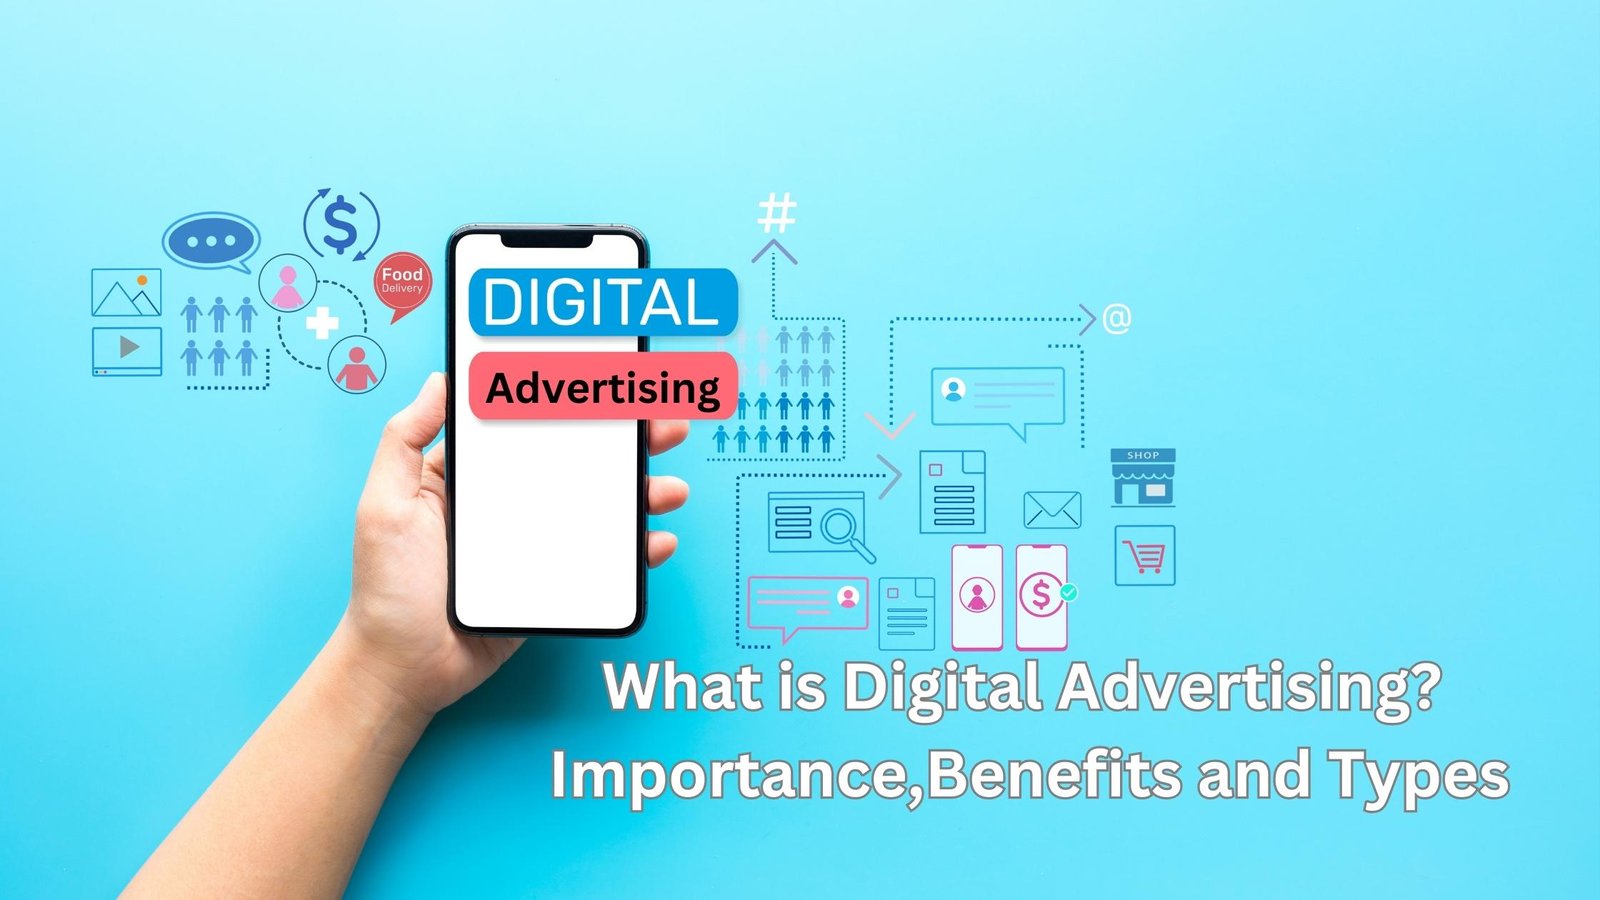 What Is Digital Advertising Importance, Benefits And Types